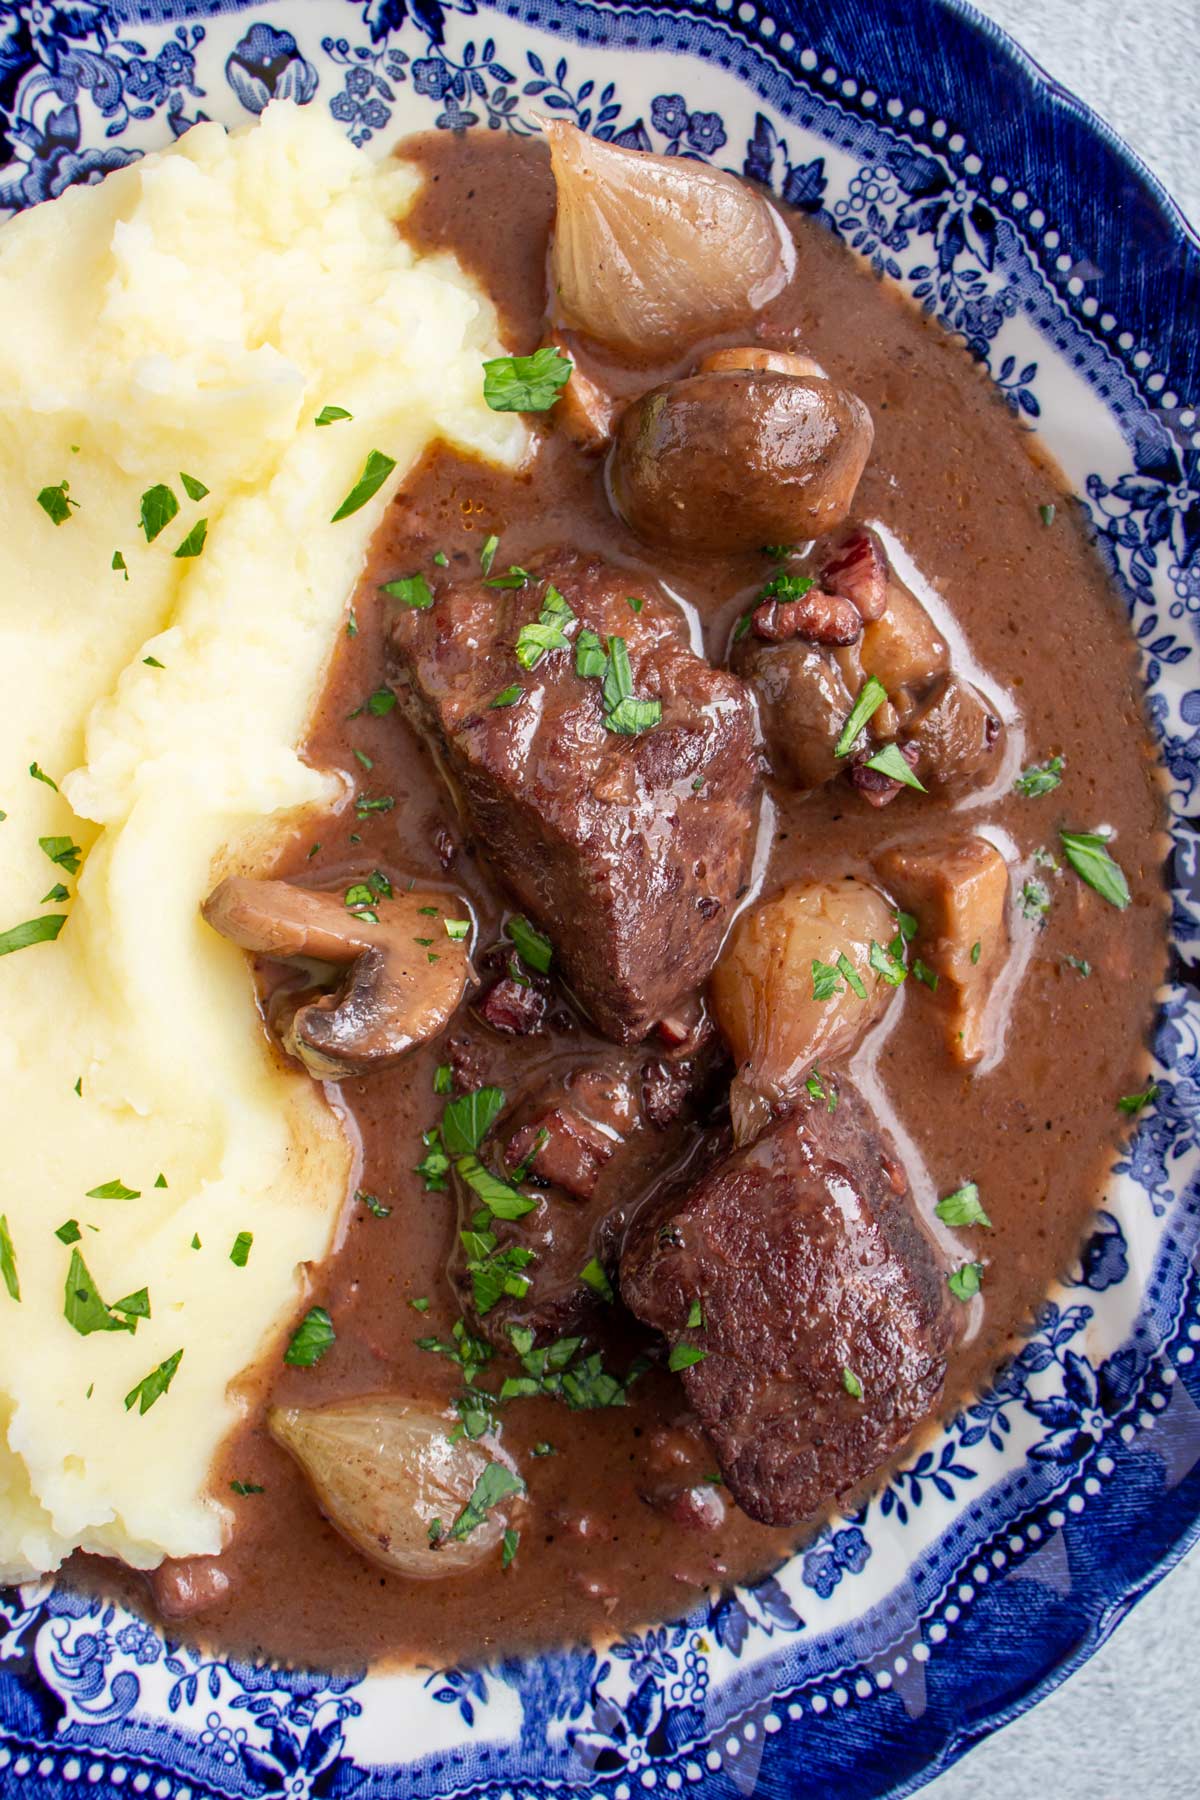 Burgundy beef stew with mushrooms and pearl onions served with mashed potatoes in a blue bowl.